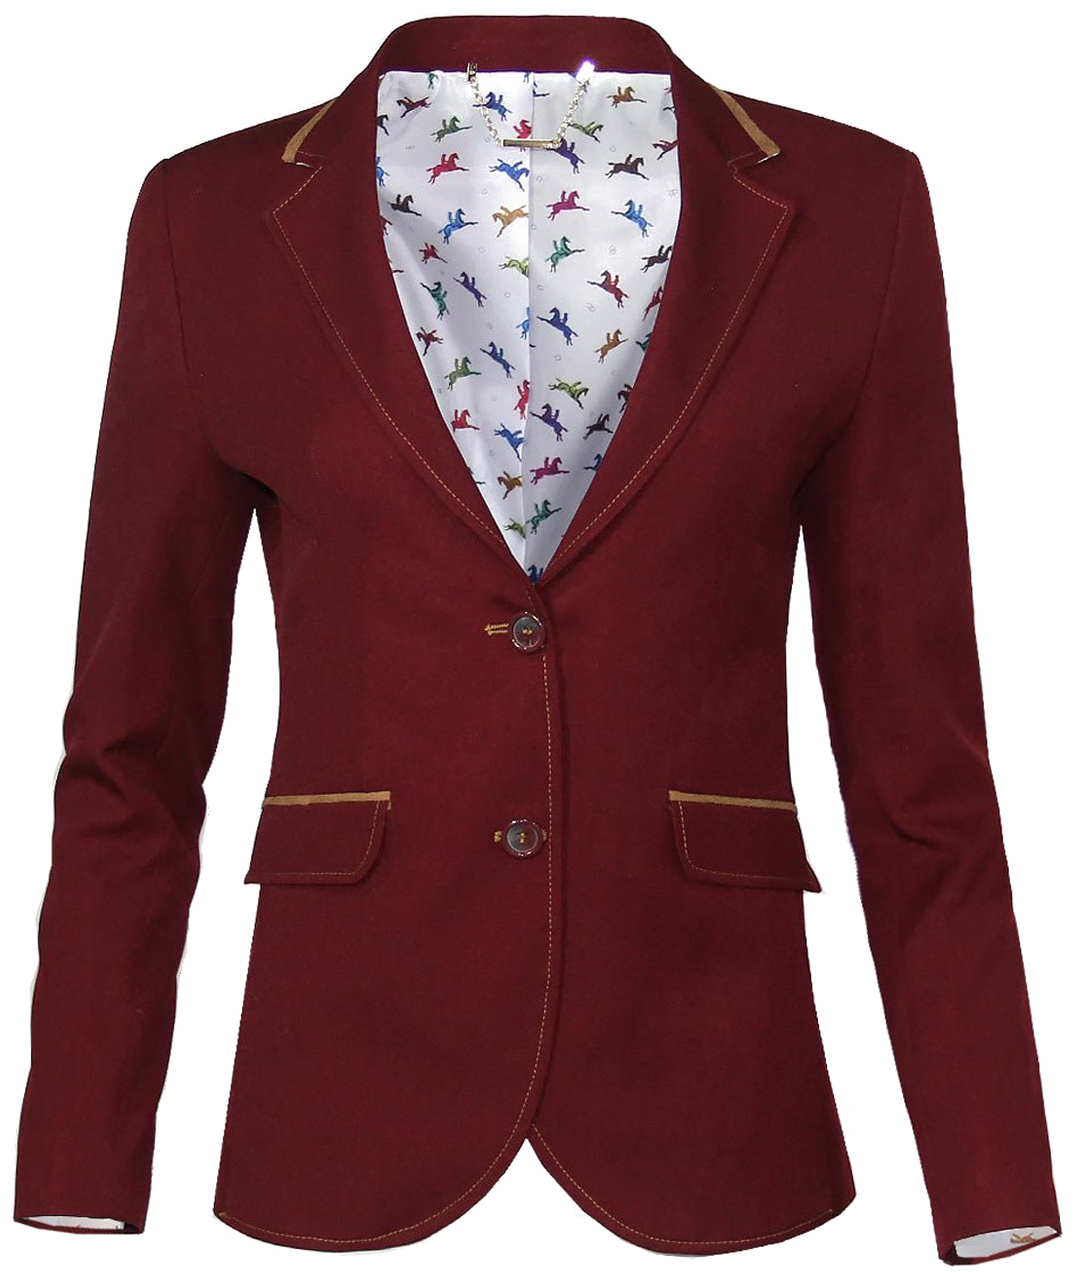 A Red Blazer With A White Shirt With Horses On It